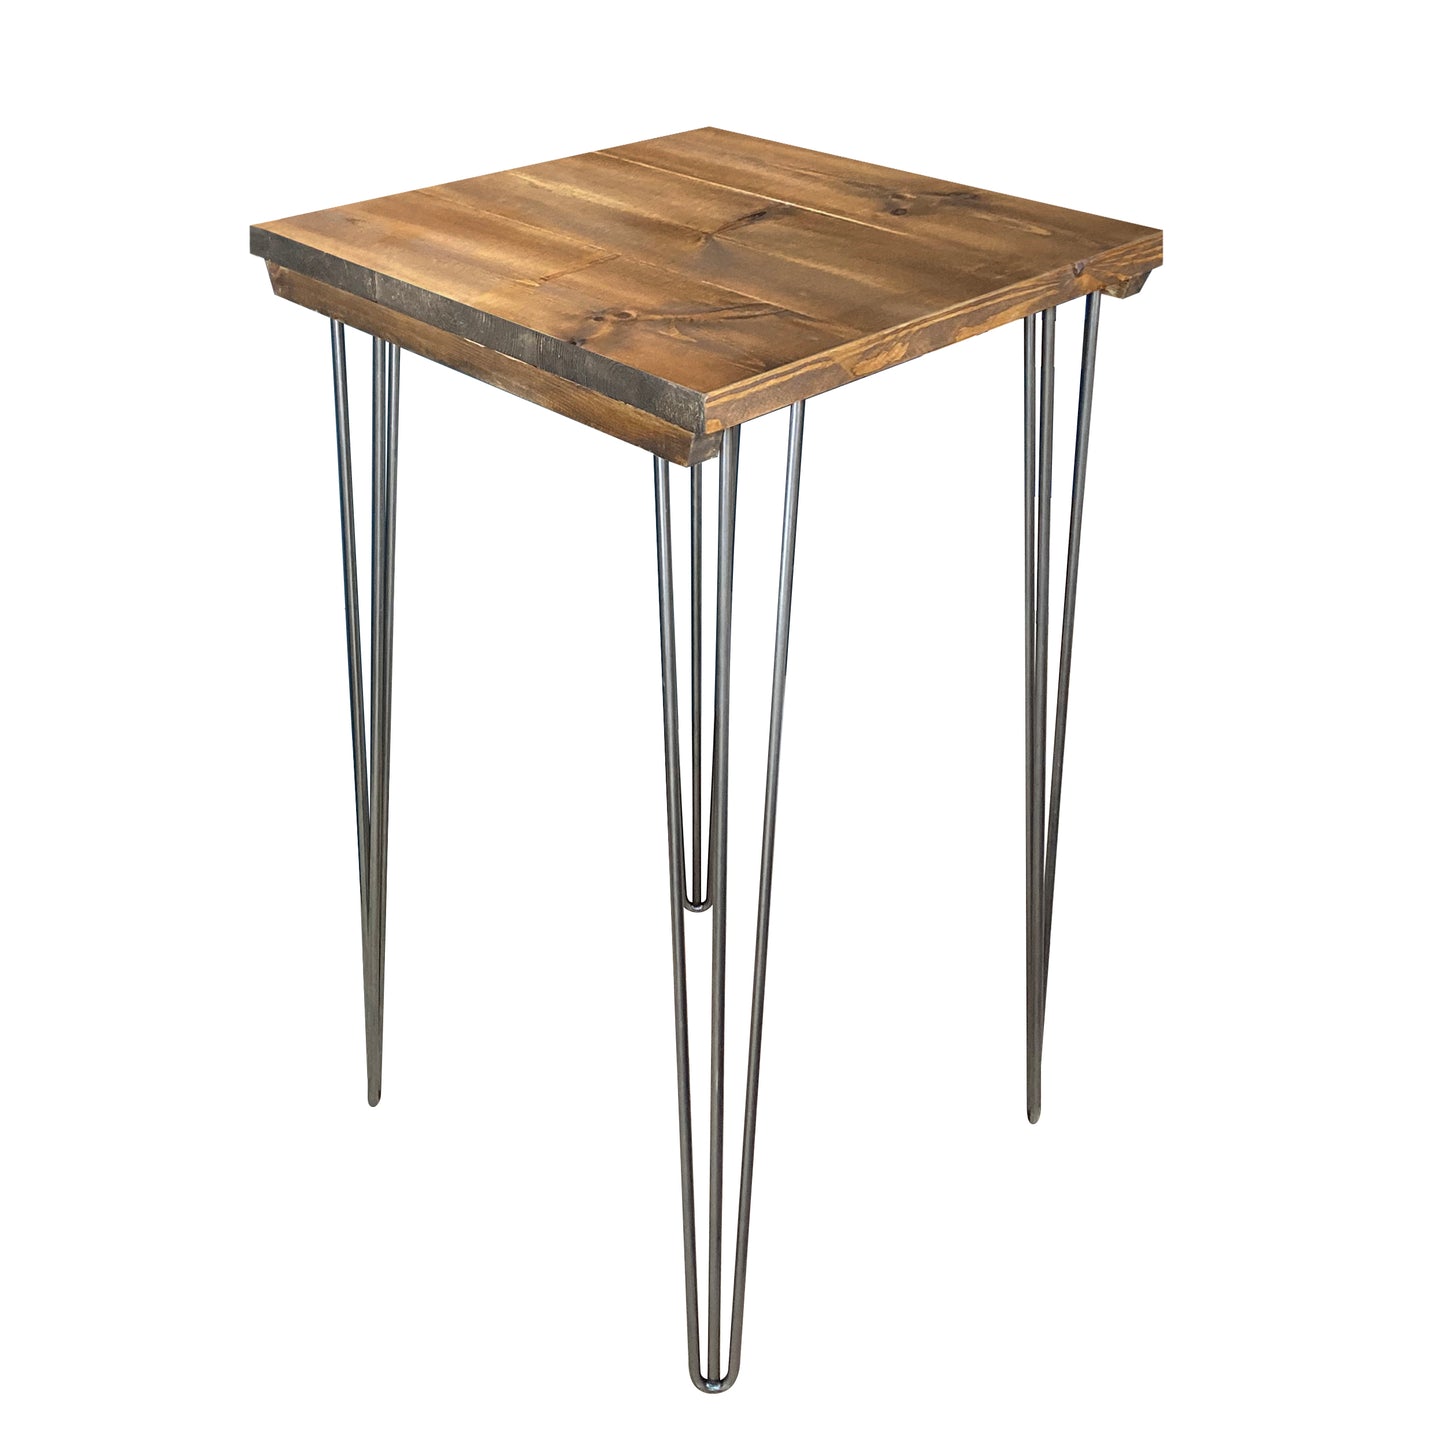 1. Indoor Rustic-style Poseur Tables